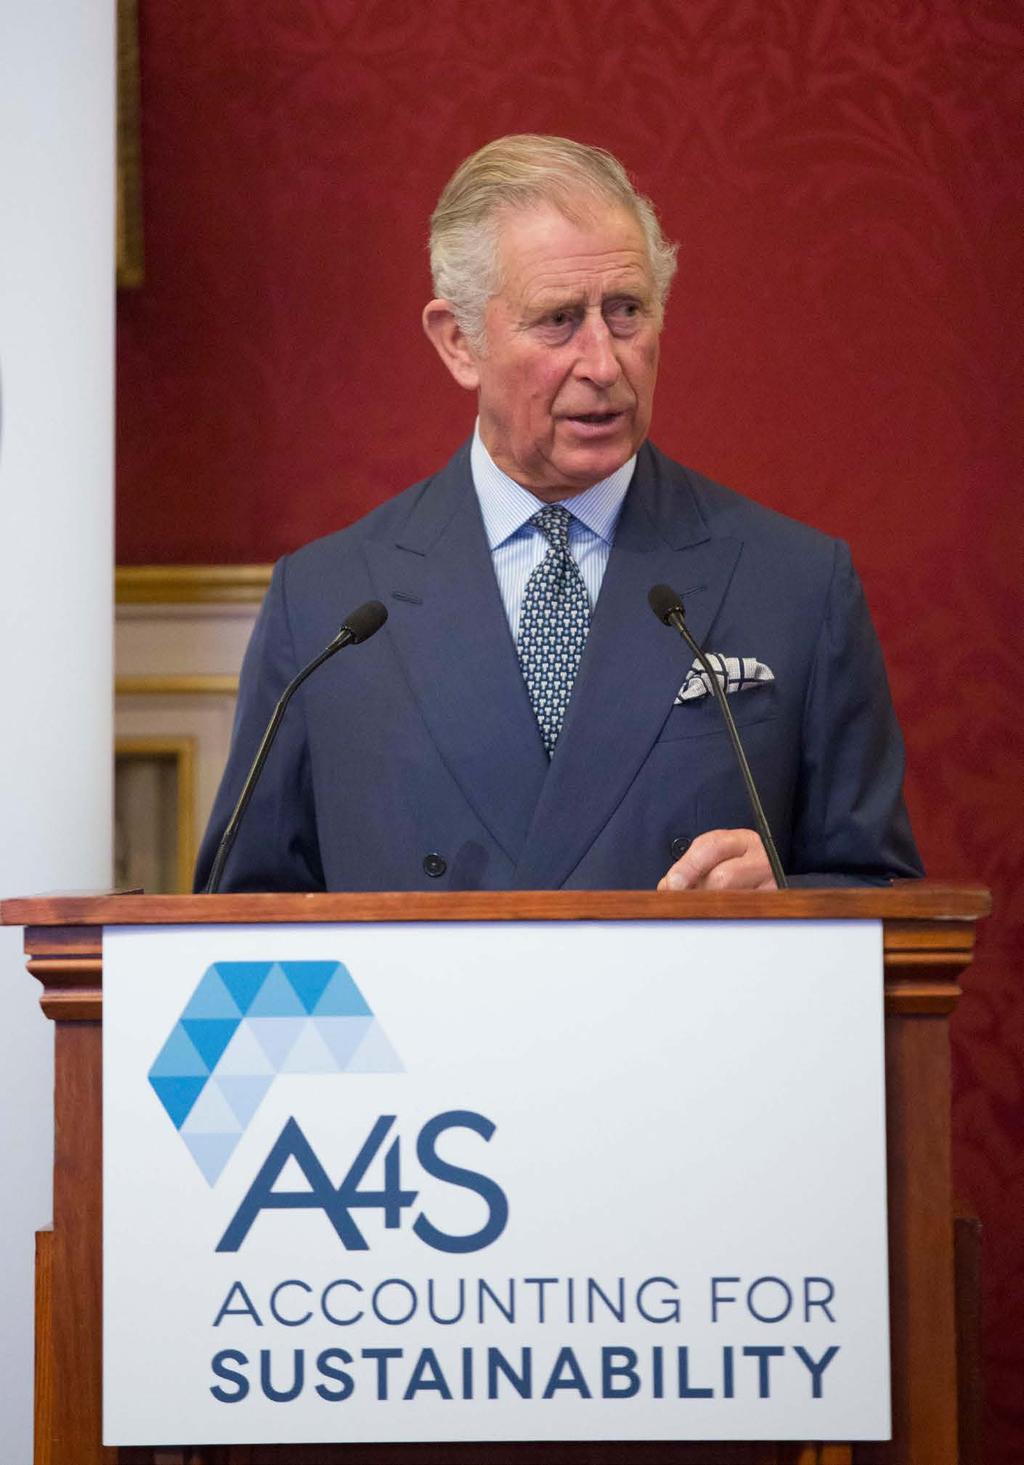 FORUM KEYNOTE SPEECH HRH THE PRINCE OF WALES HRH The Prince of Wales delivered a speech to an audience of world leaders from the finance and accounting community during the Summit s Forum session.